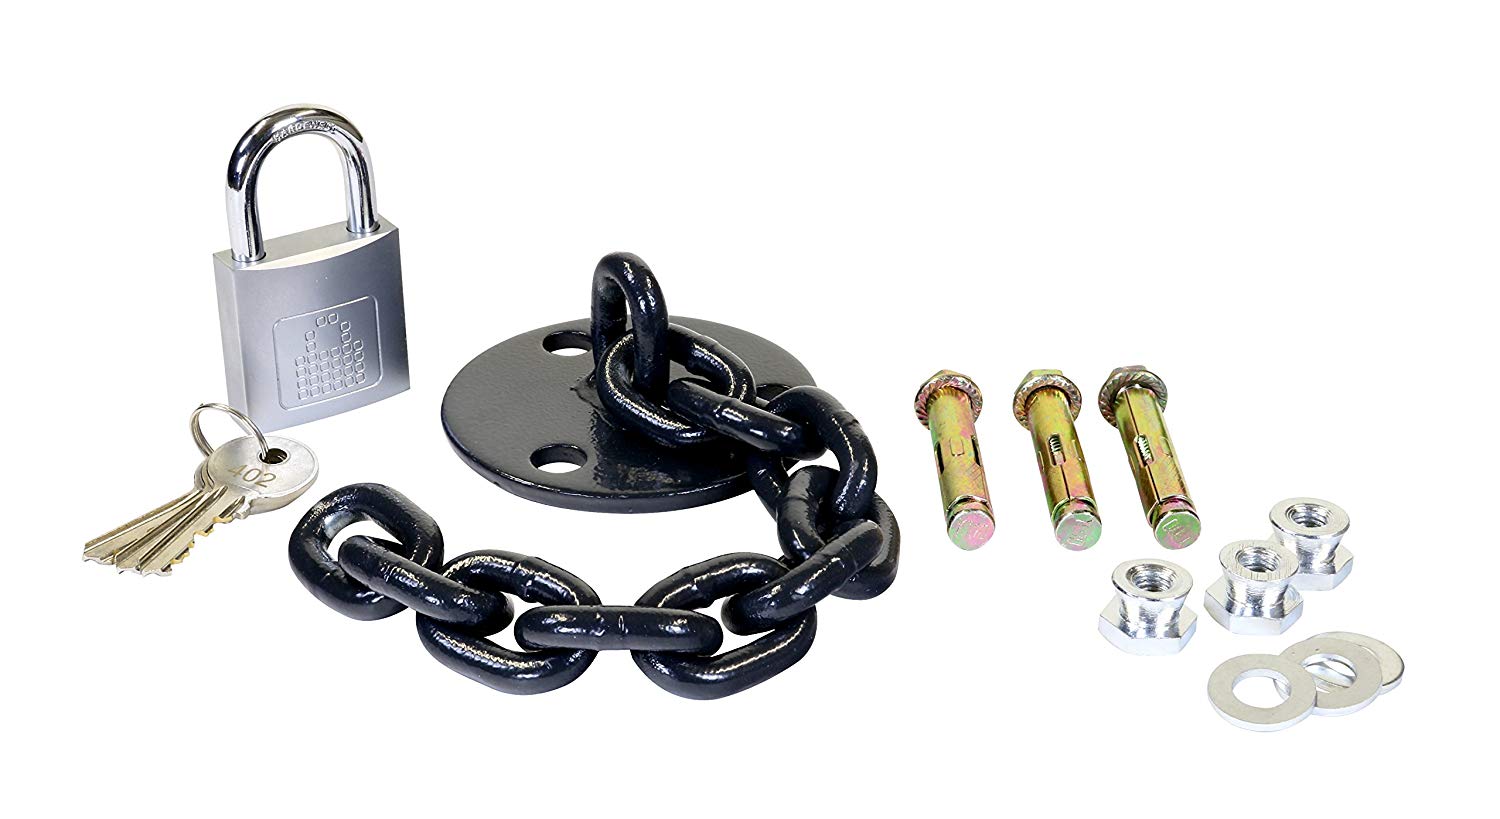 LocknCharge Carrier Lock Down Kit with Chains & Bolts